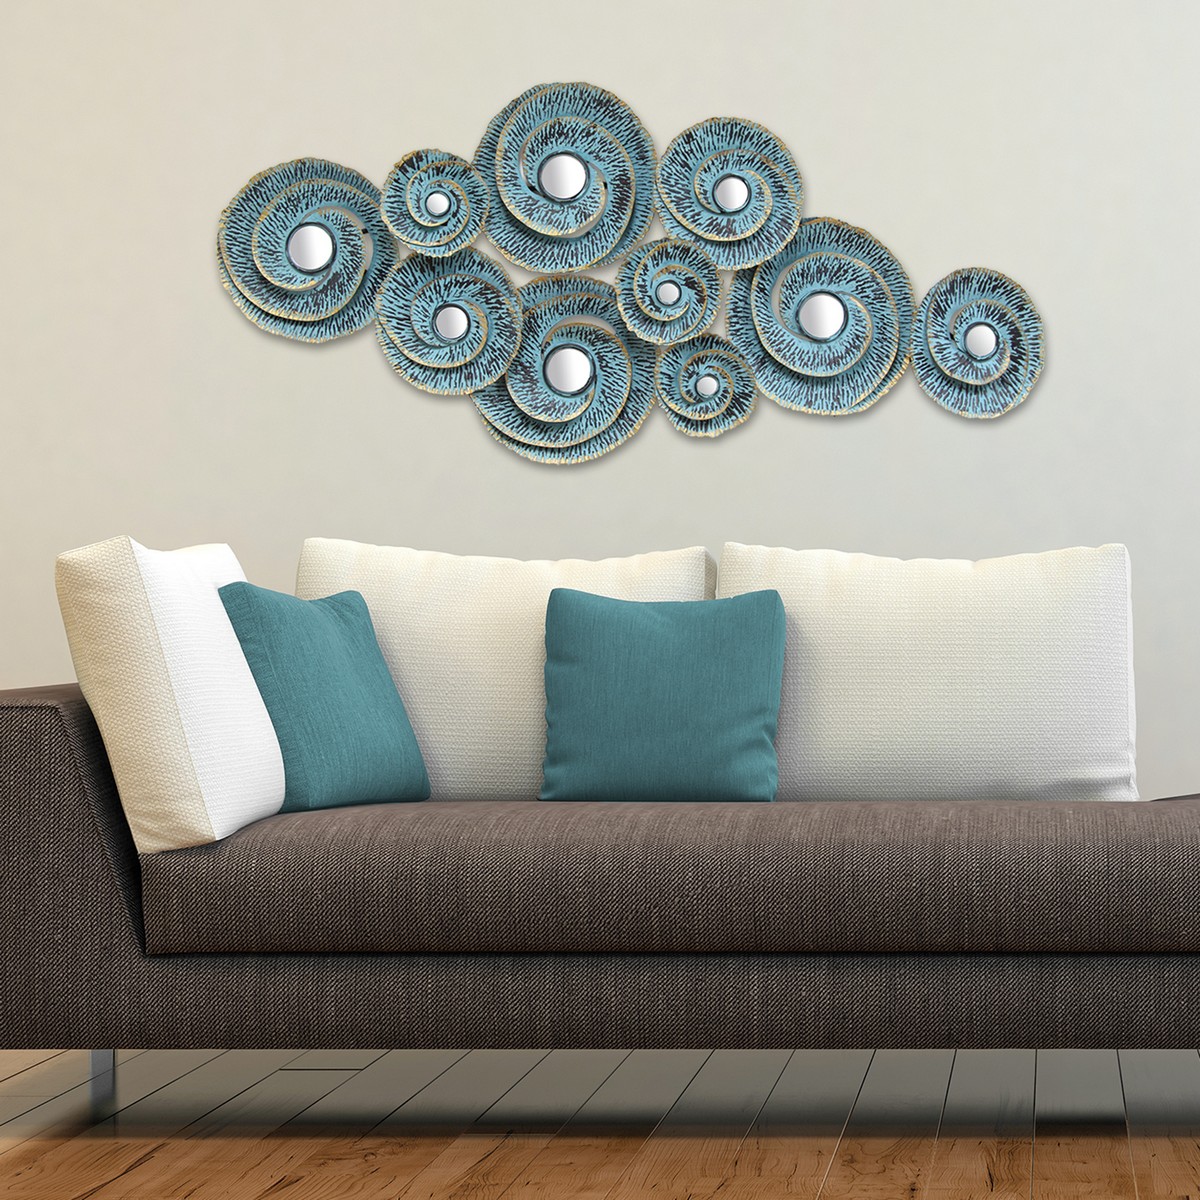 Stratton Home Decor Decorative Waves Metal Wall Decor - Distressed Teal